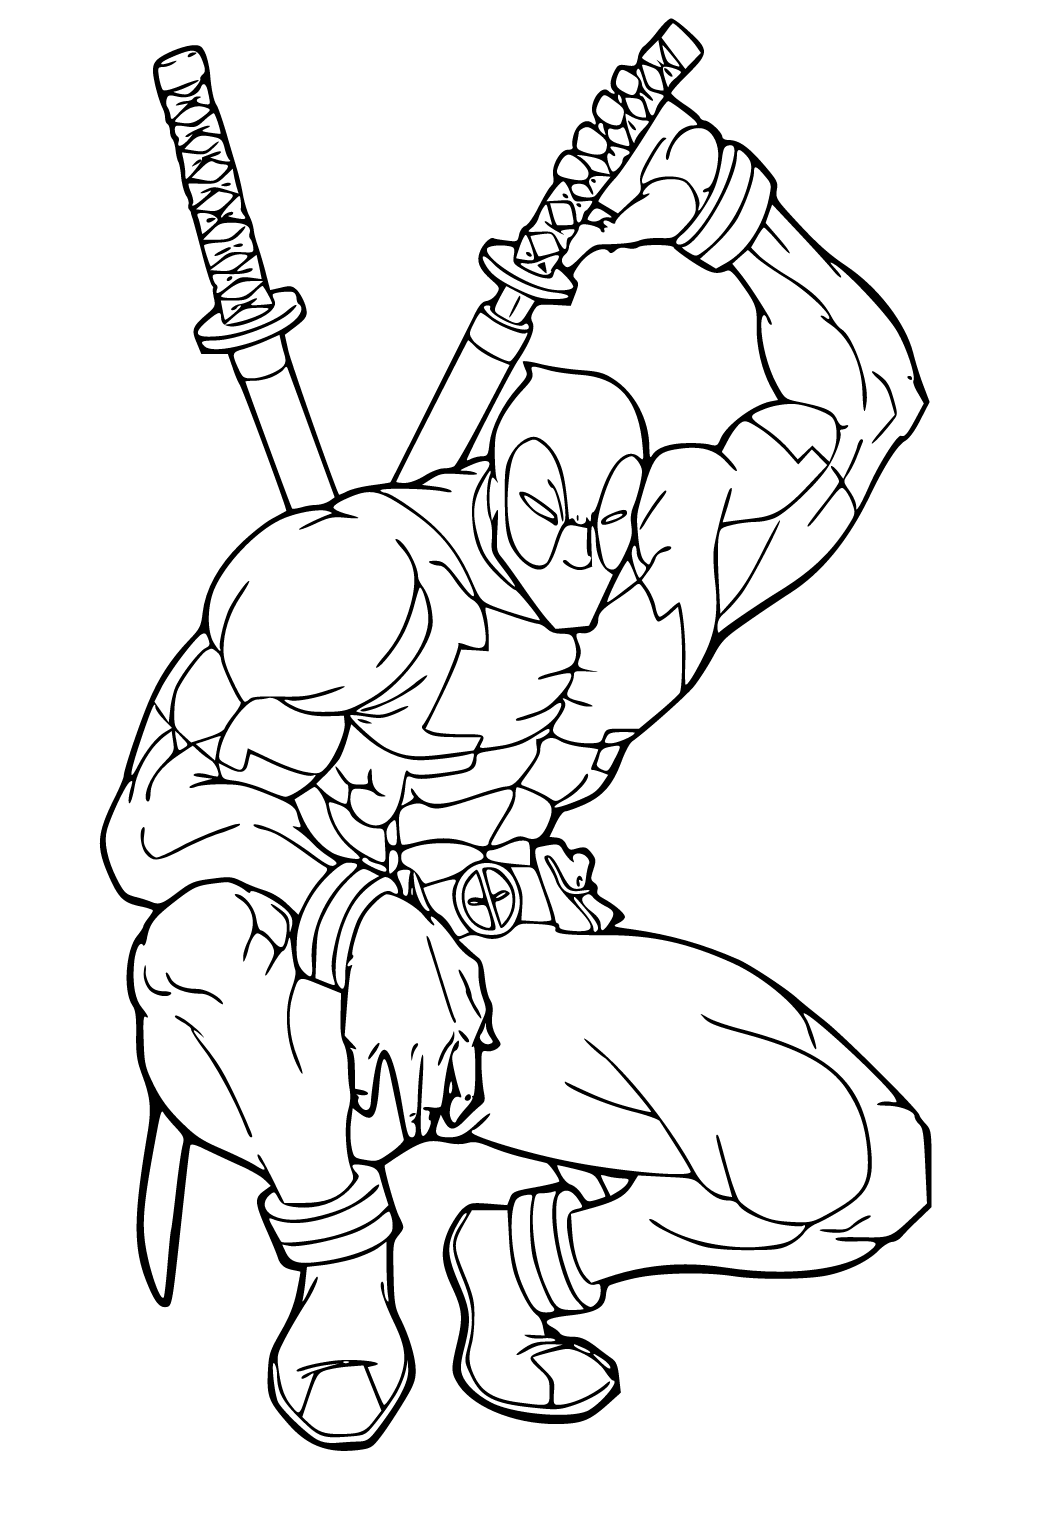 deadpool and spiderman coloring pages